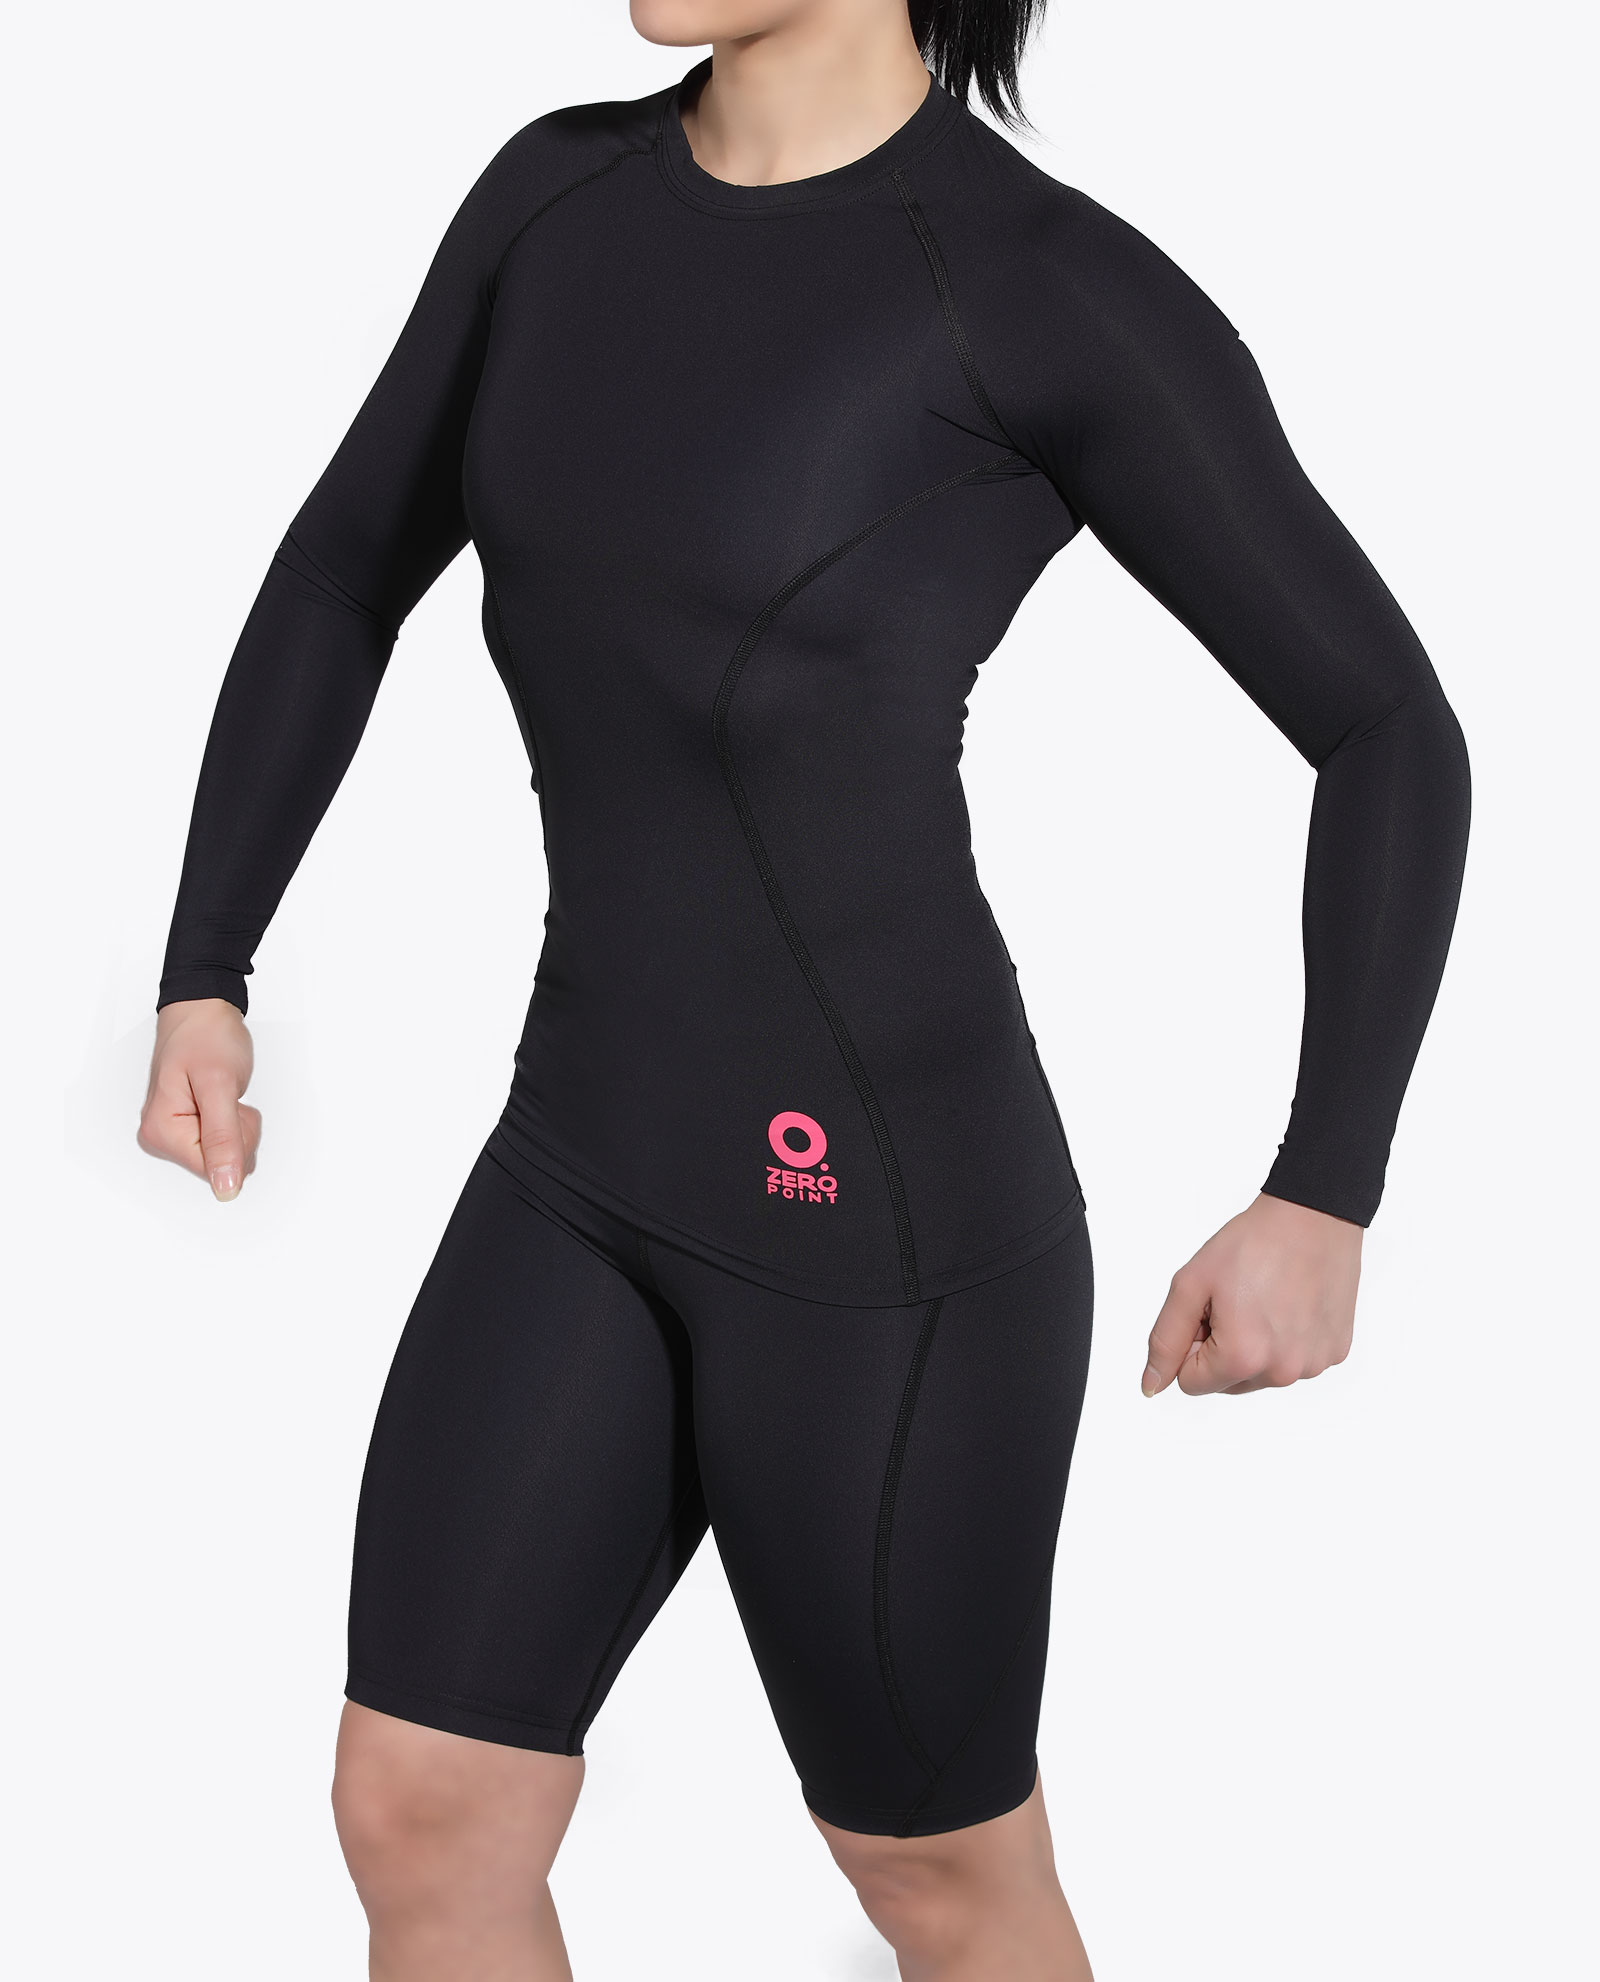 Long Sleeve Compression Top - ZEROPOINT